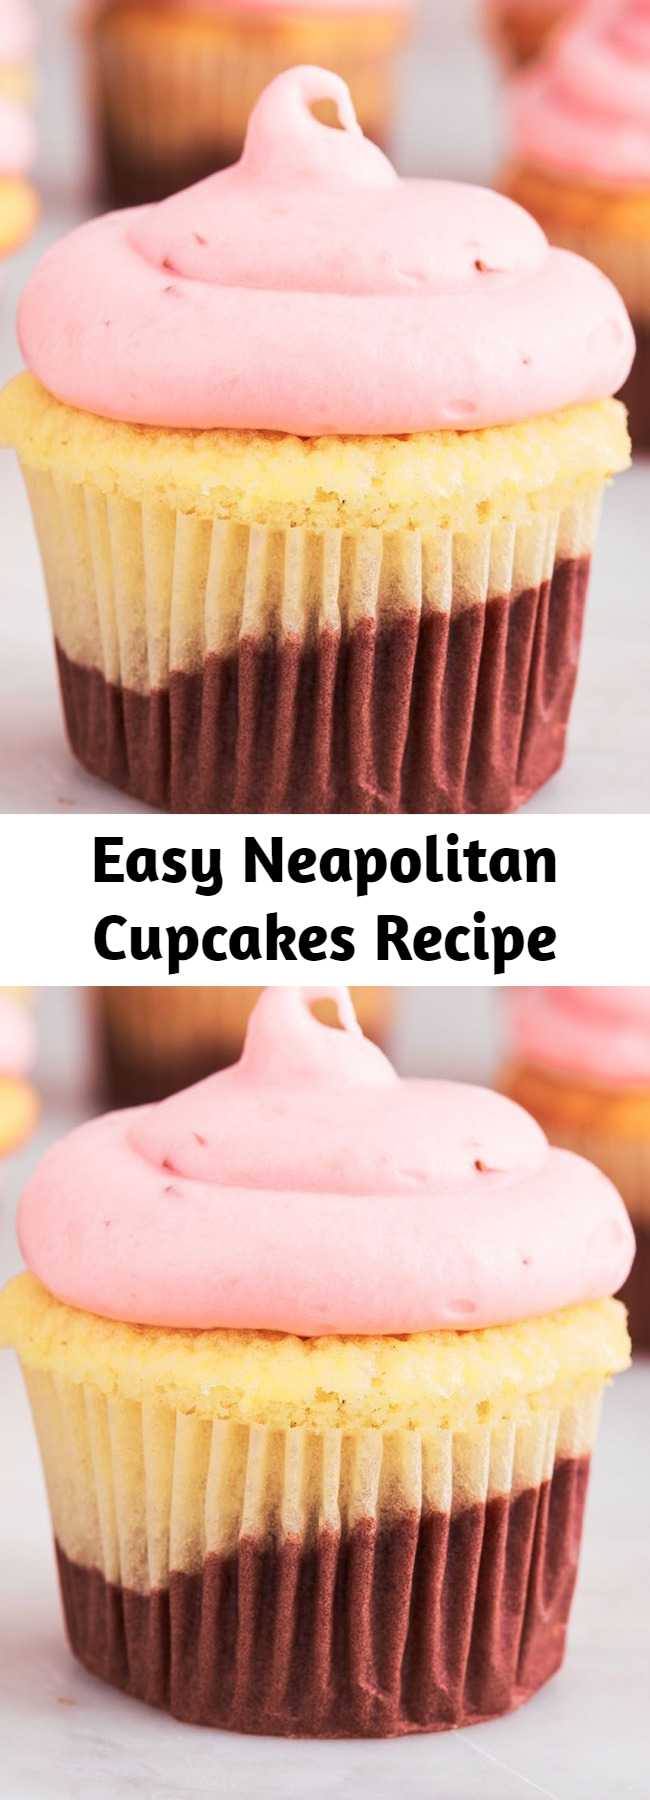 Easy Neapolitan Cupcakes Recipe - Step up your cupcake game with this easy recipe for Neapolitan Cupcakes.